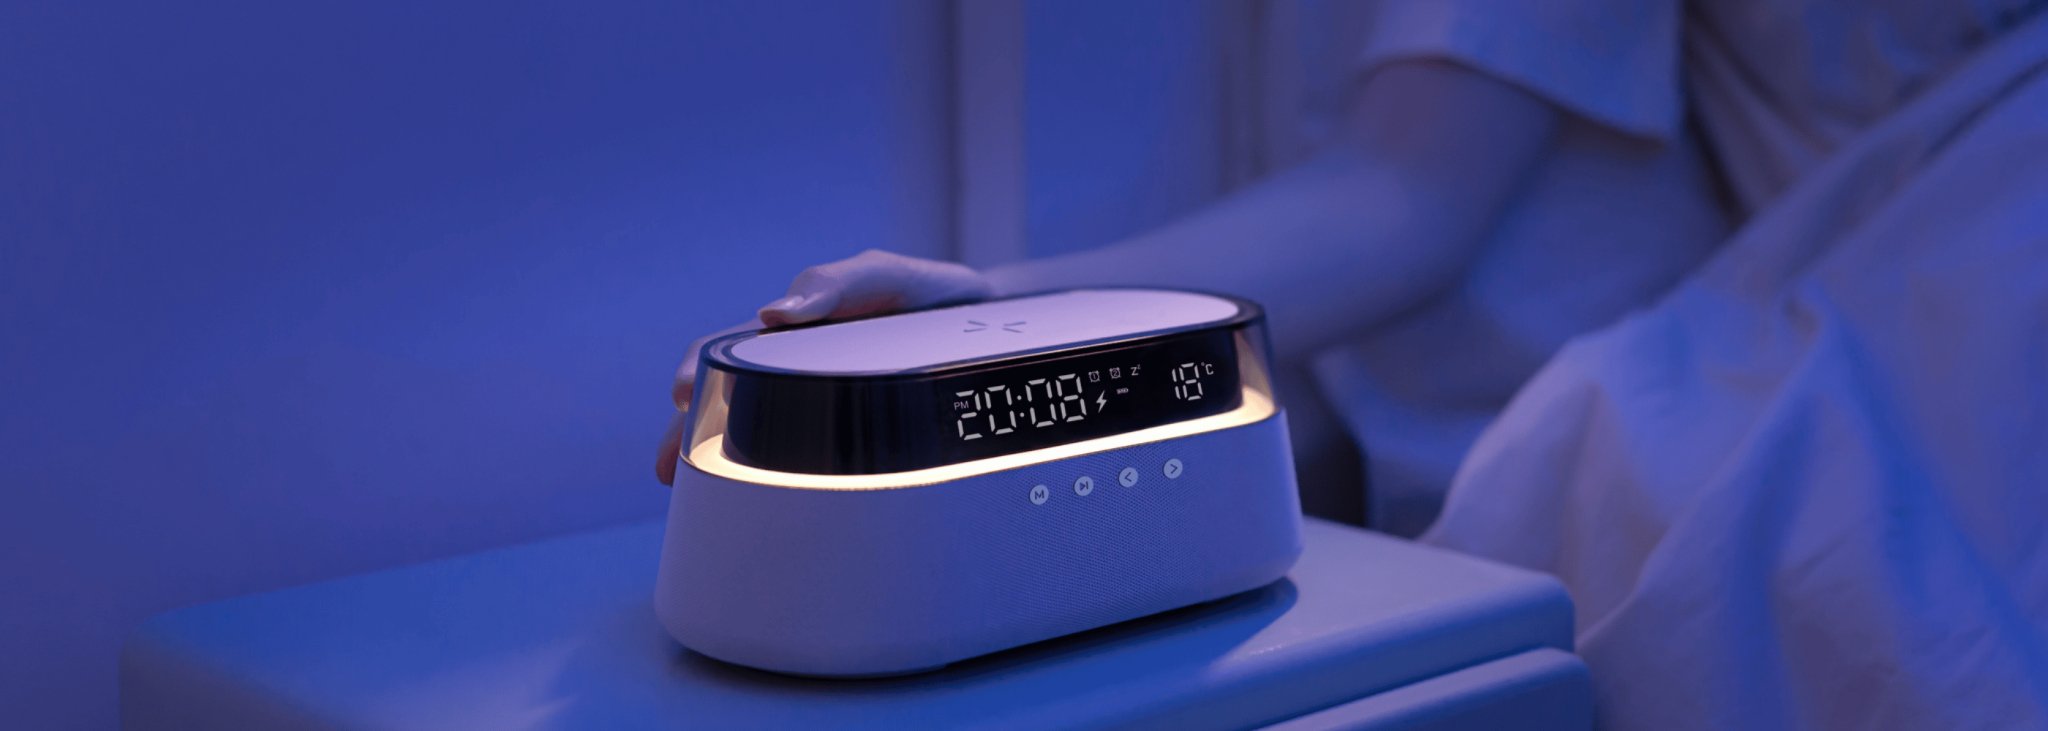 UK Technology radio alarm clock glass top on a bedside table at nighttime